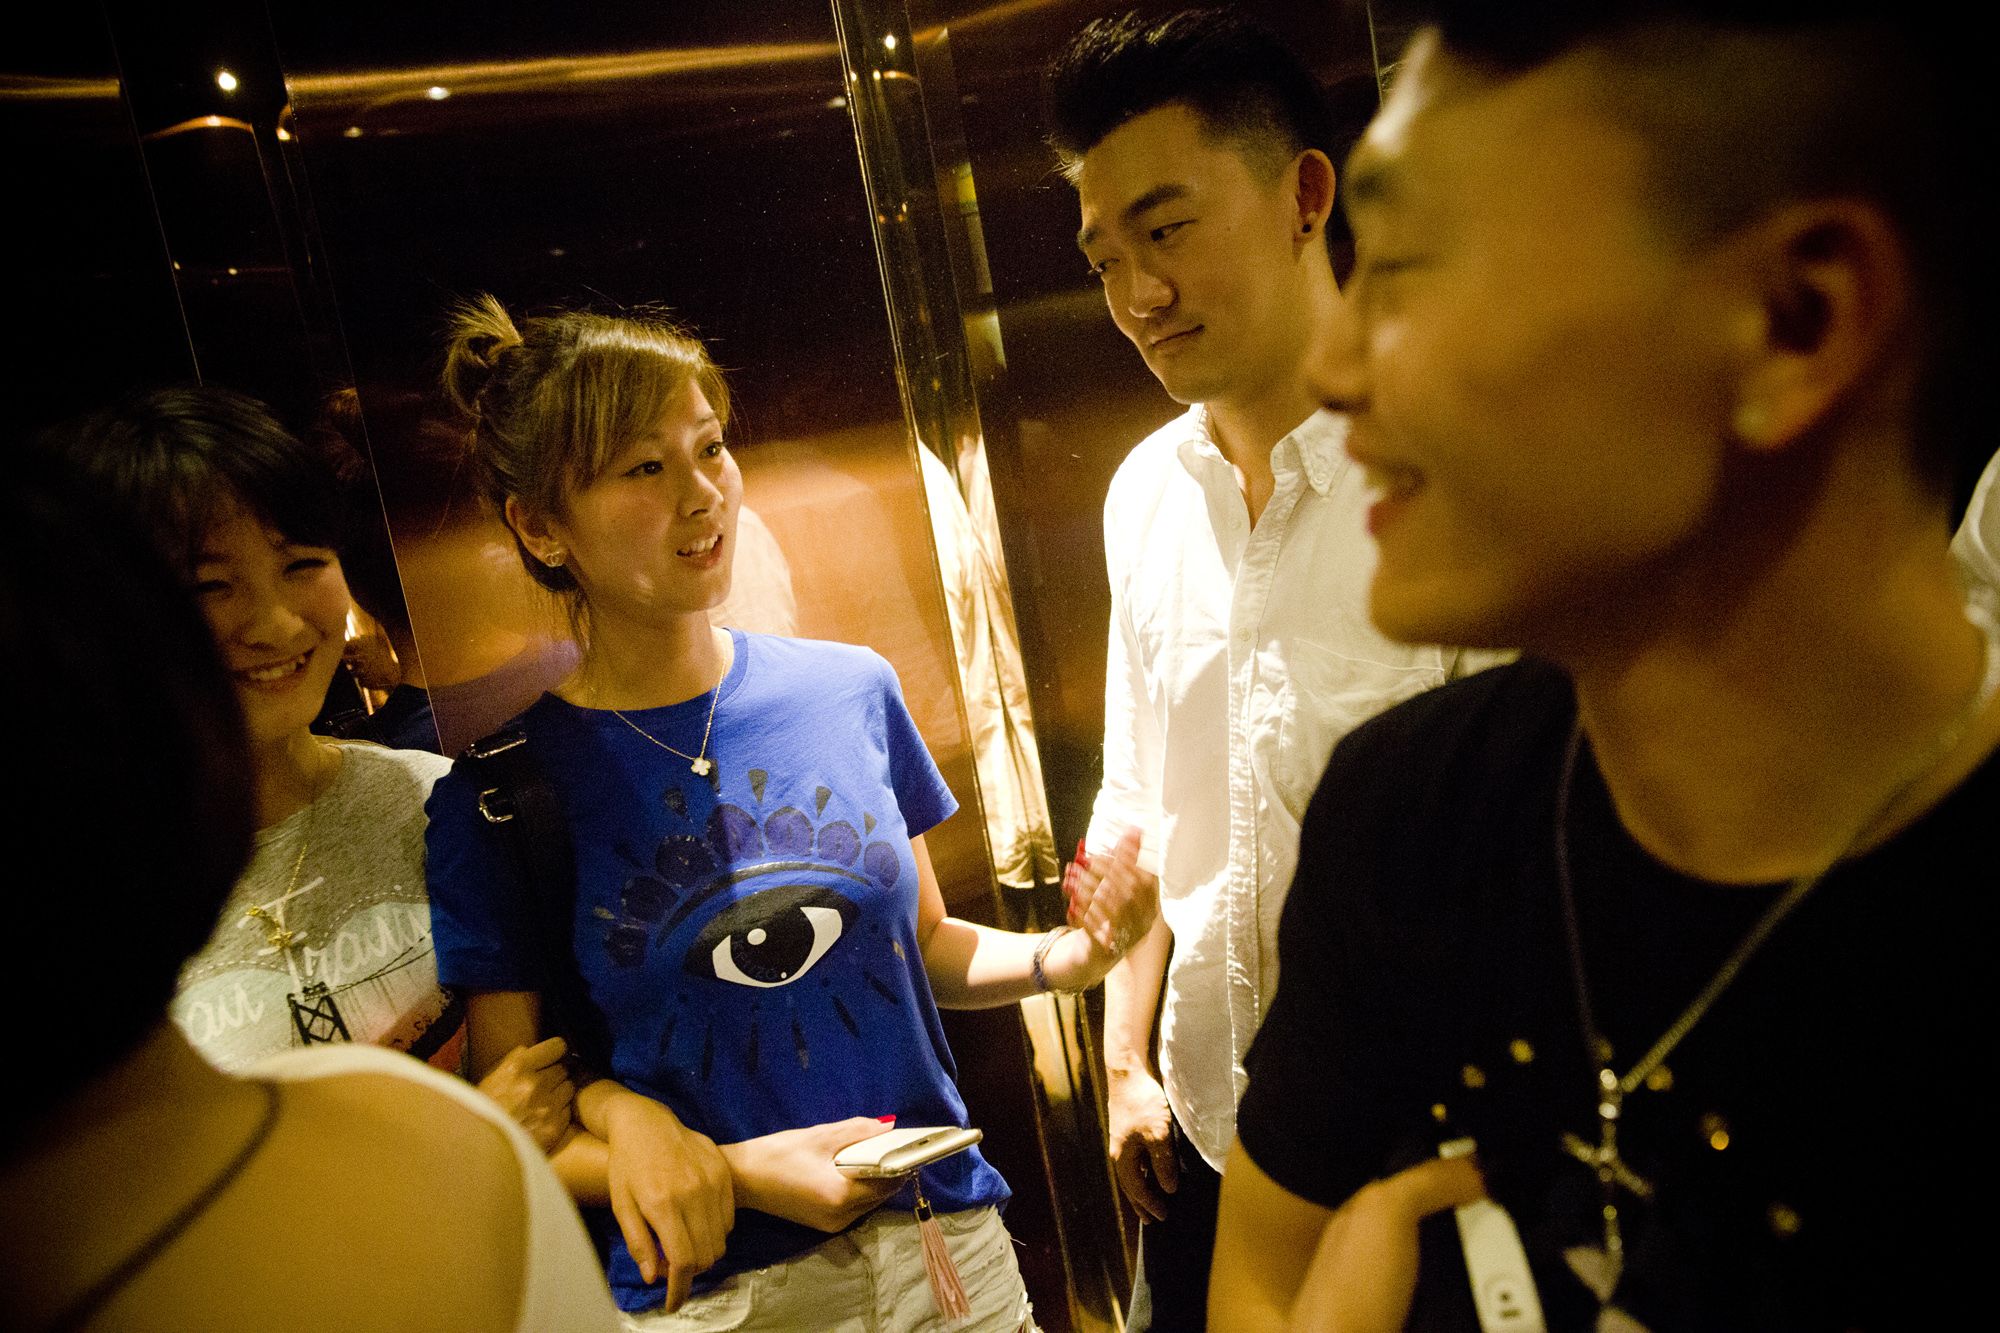 Two mentors chat with women they invited in the elevator as they leave the karaoke bar, just past midnight of May 18, 2015.